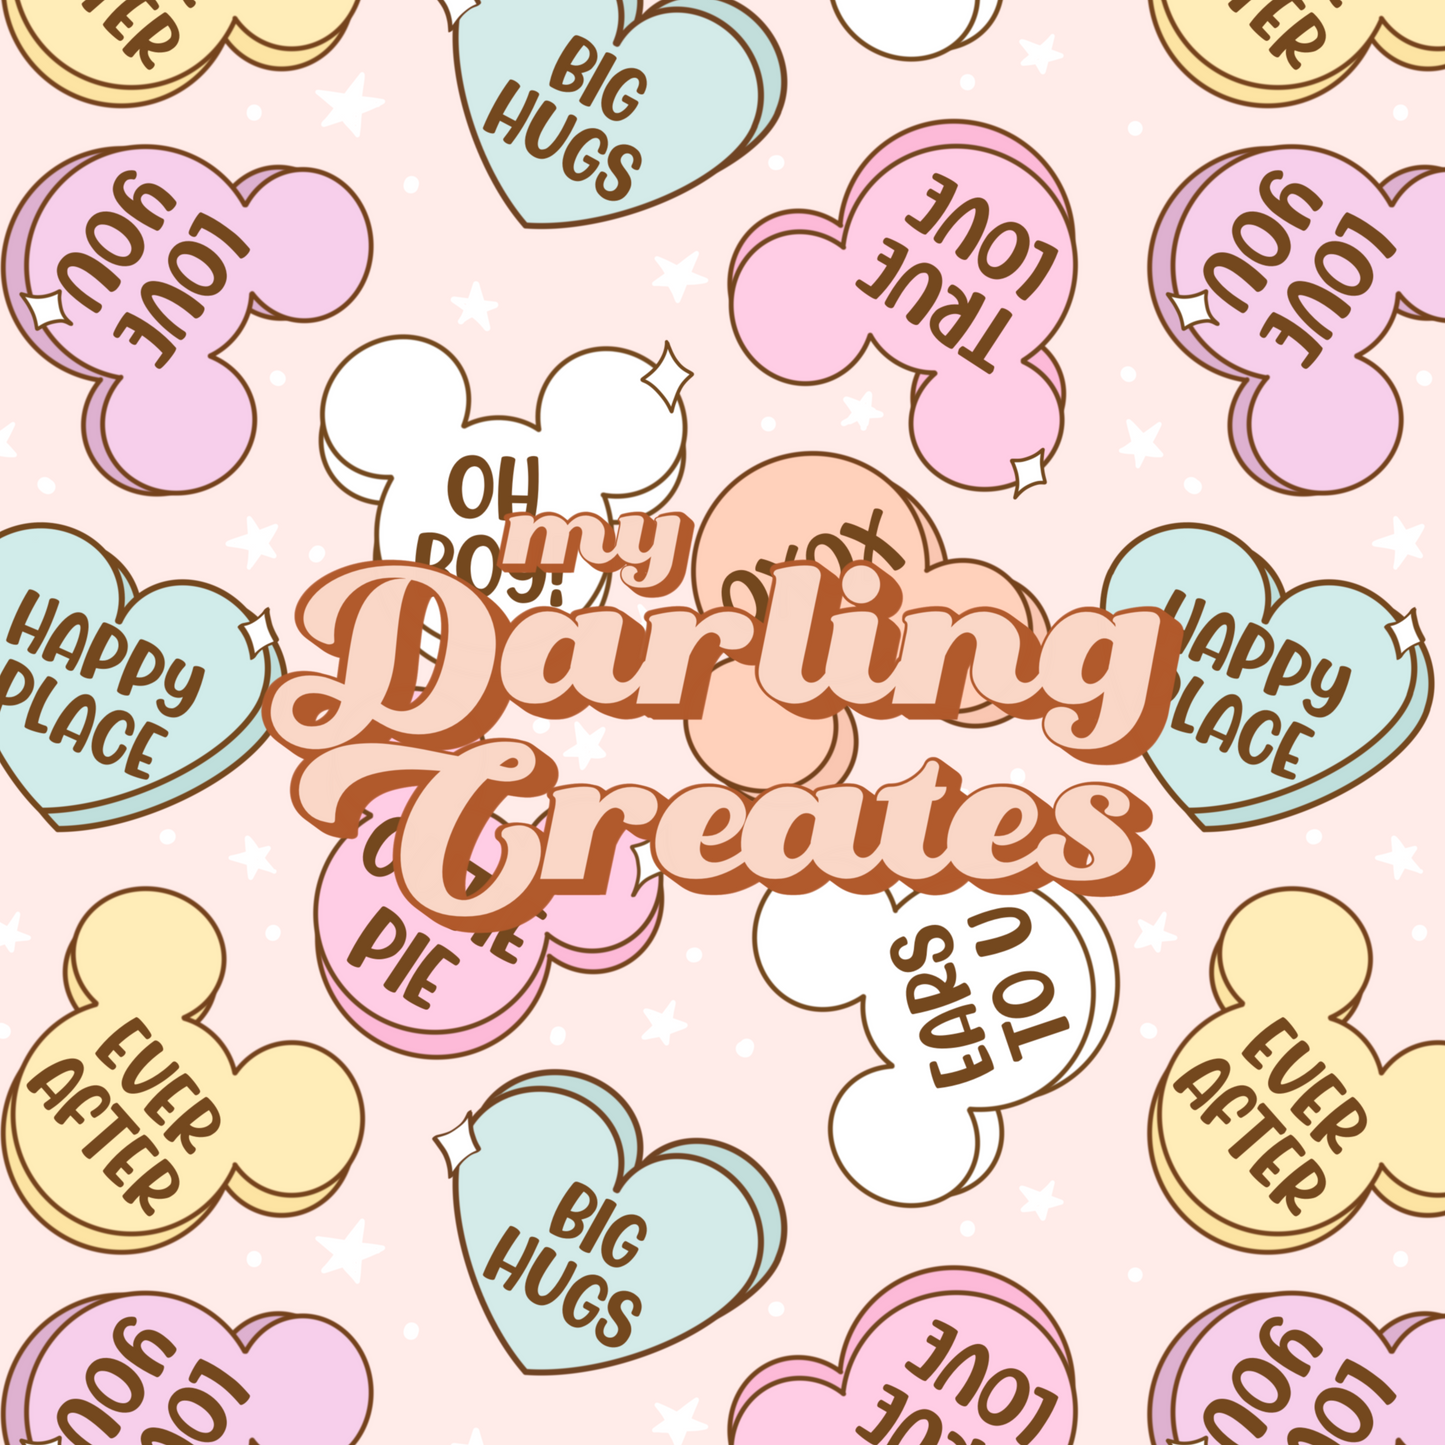 Candy Hearts and Mouse - Seamless File